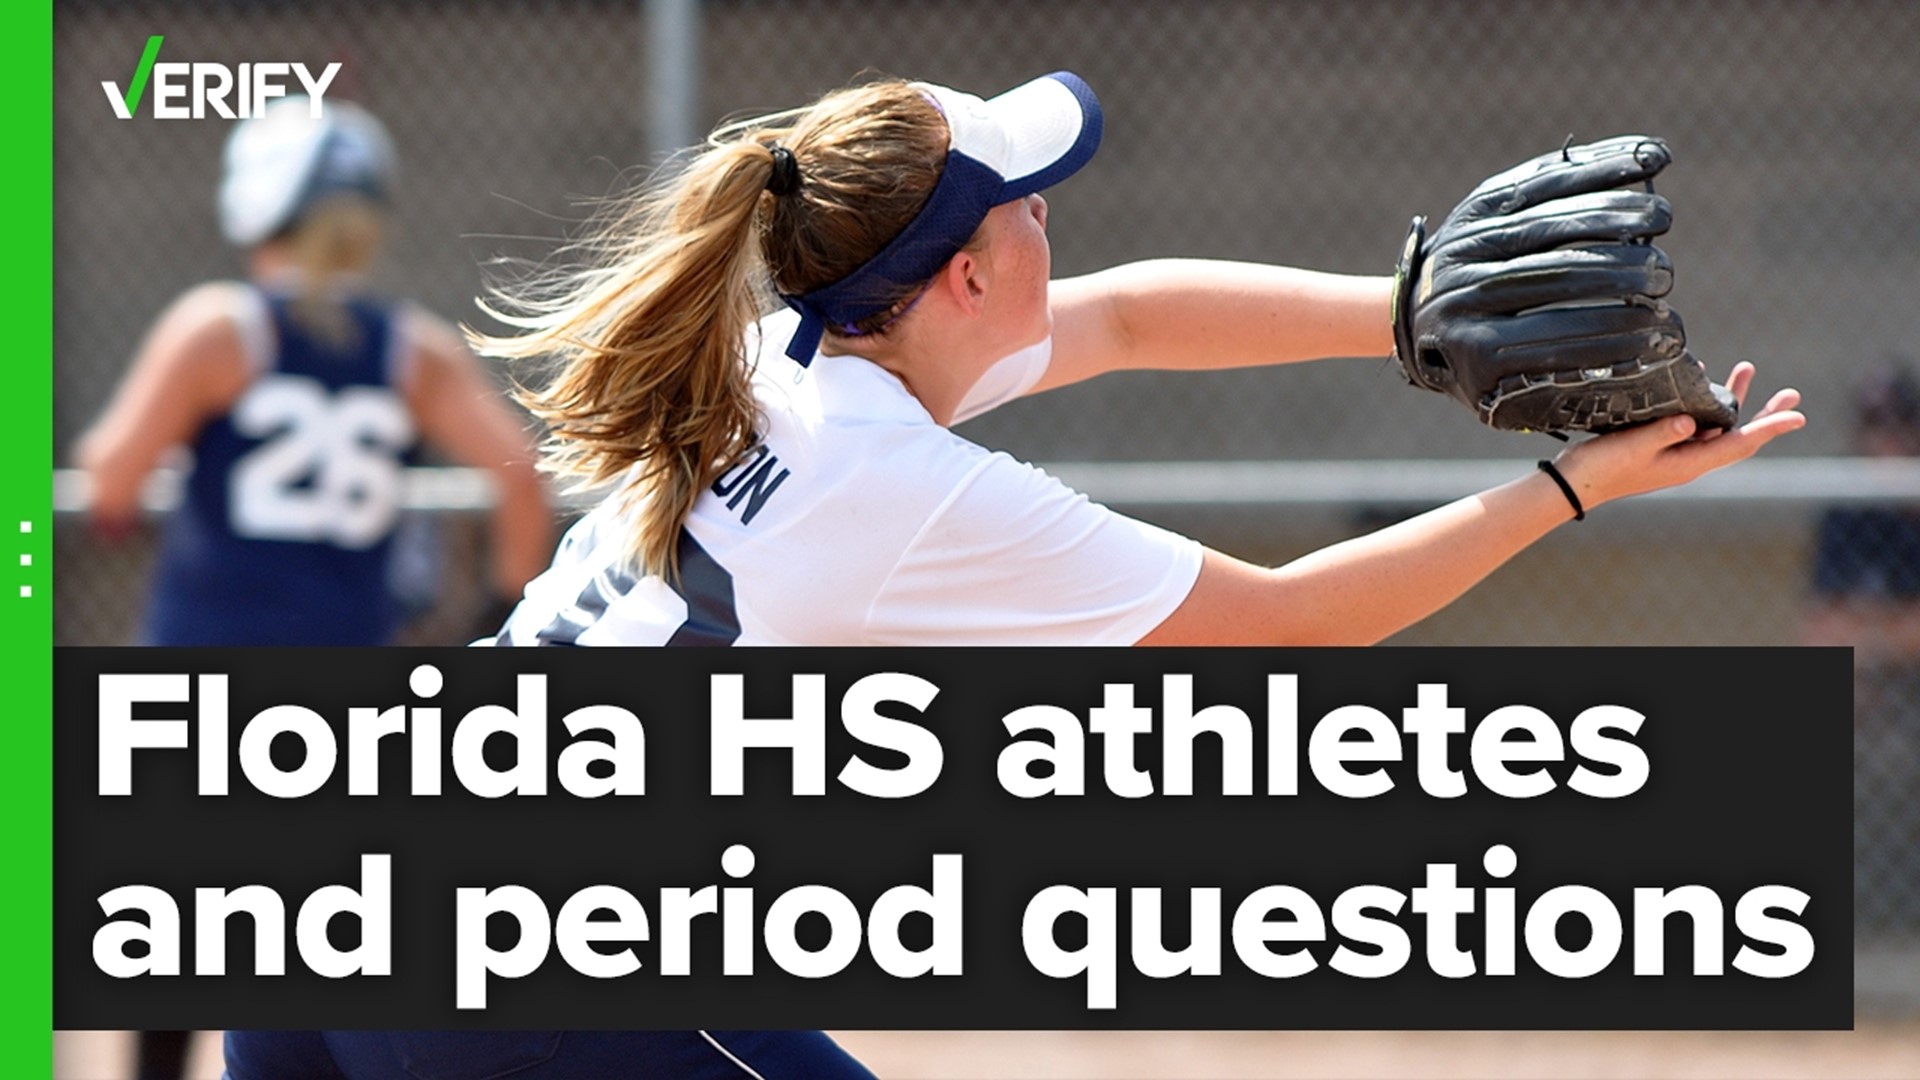 High school athletes in Florida are being asked questions about their menstrual cycles, but they aren’t required to answer them.